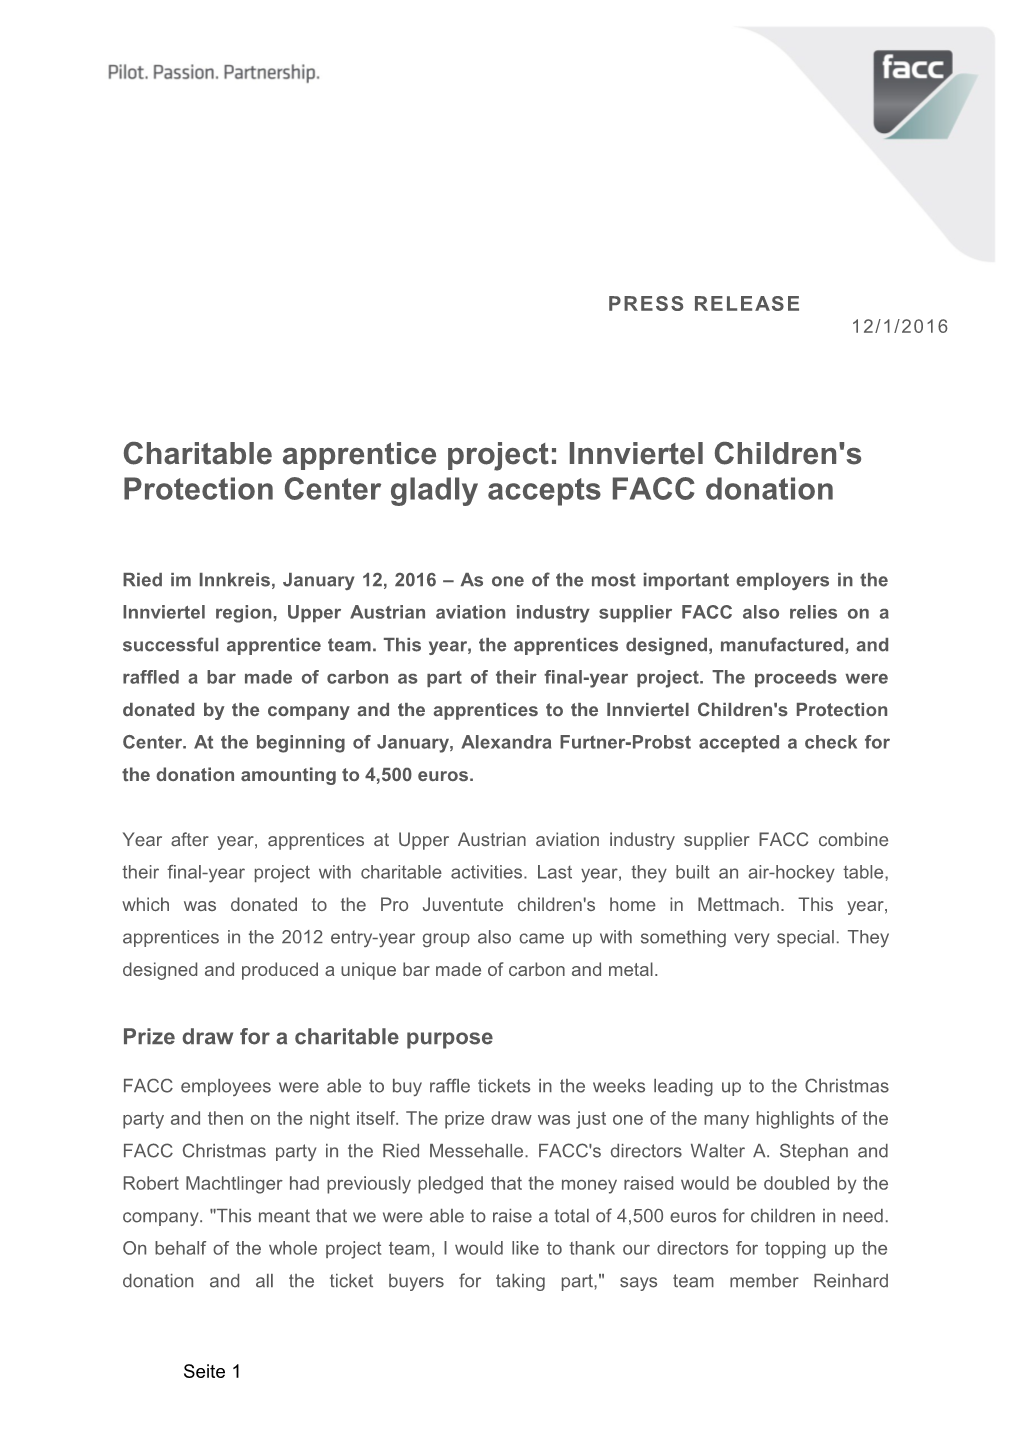 Charitable Apprentice Project: Innviertel Children's Protection Center Gladly Accepts